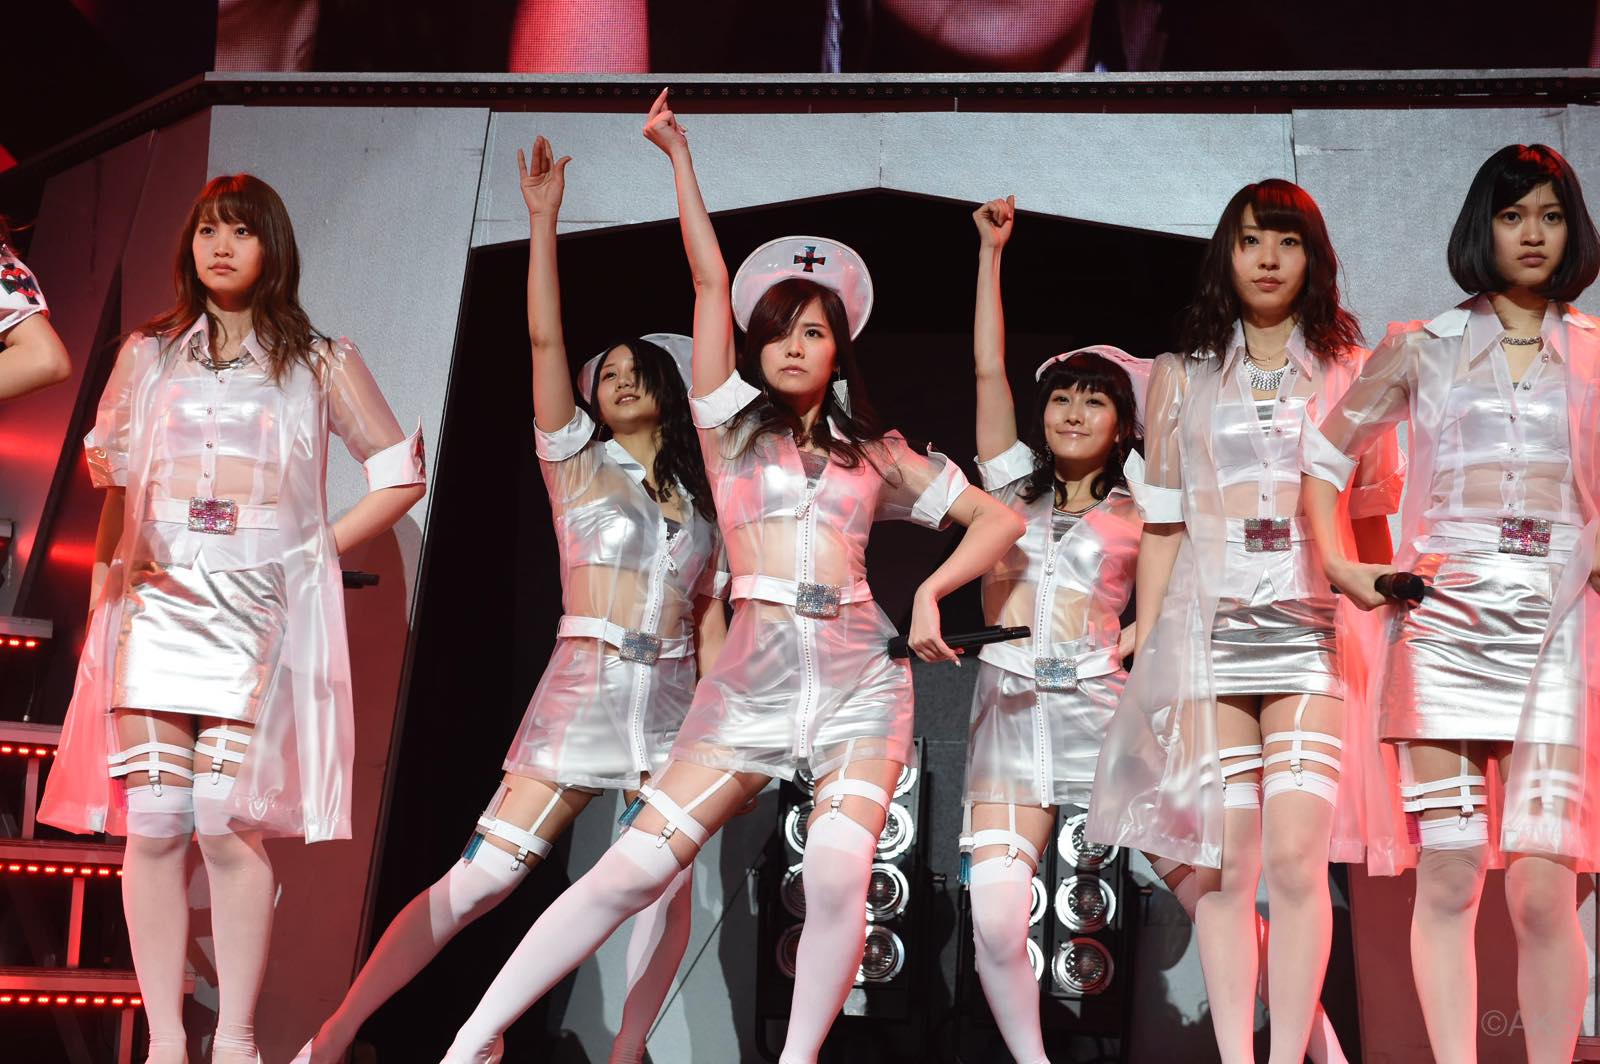 Things Heat Up on the 4th Day of AKB48 Set List Request Hour Best 1035 2015!